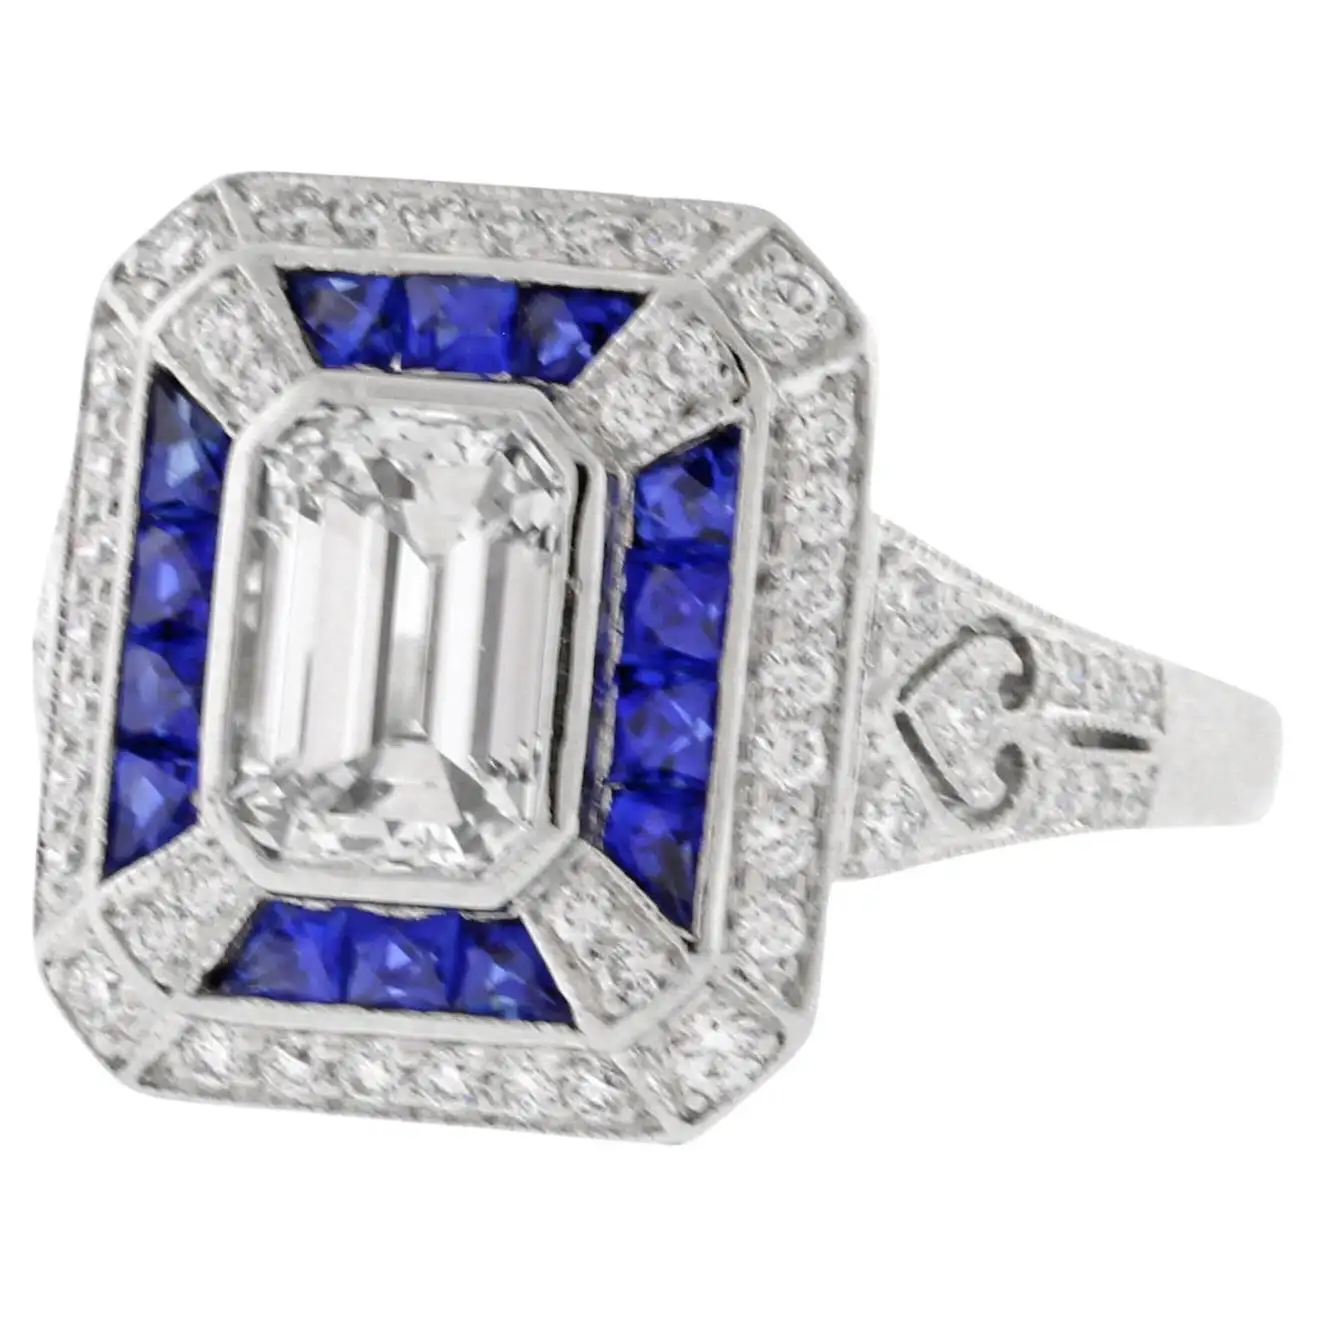 Art Deco Style Emerald Cut Diamond and Sapphire Ring | Pampillonia ...